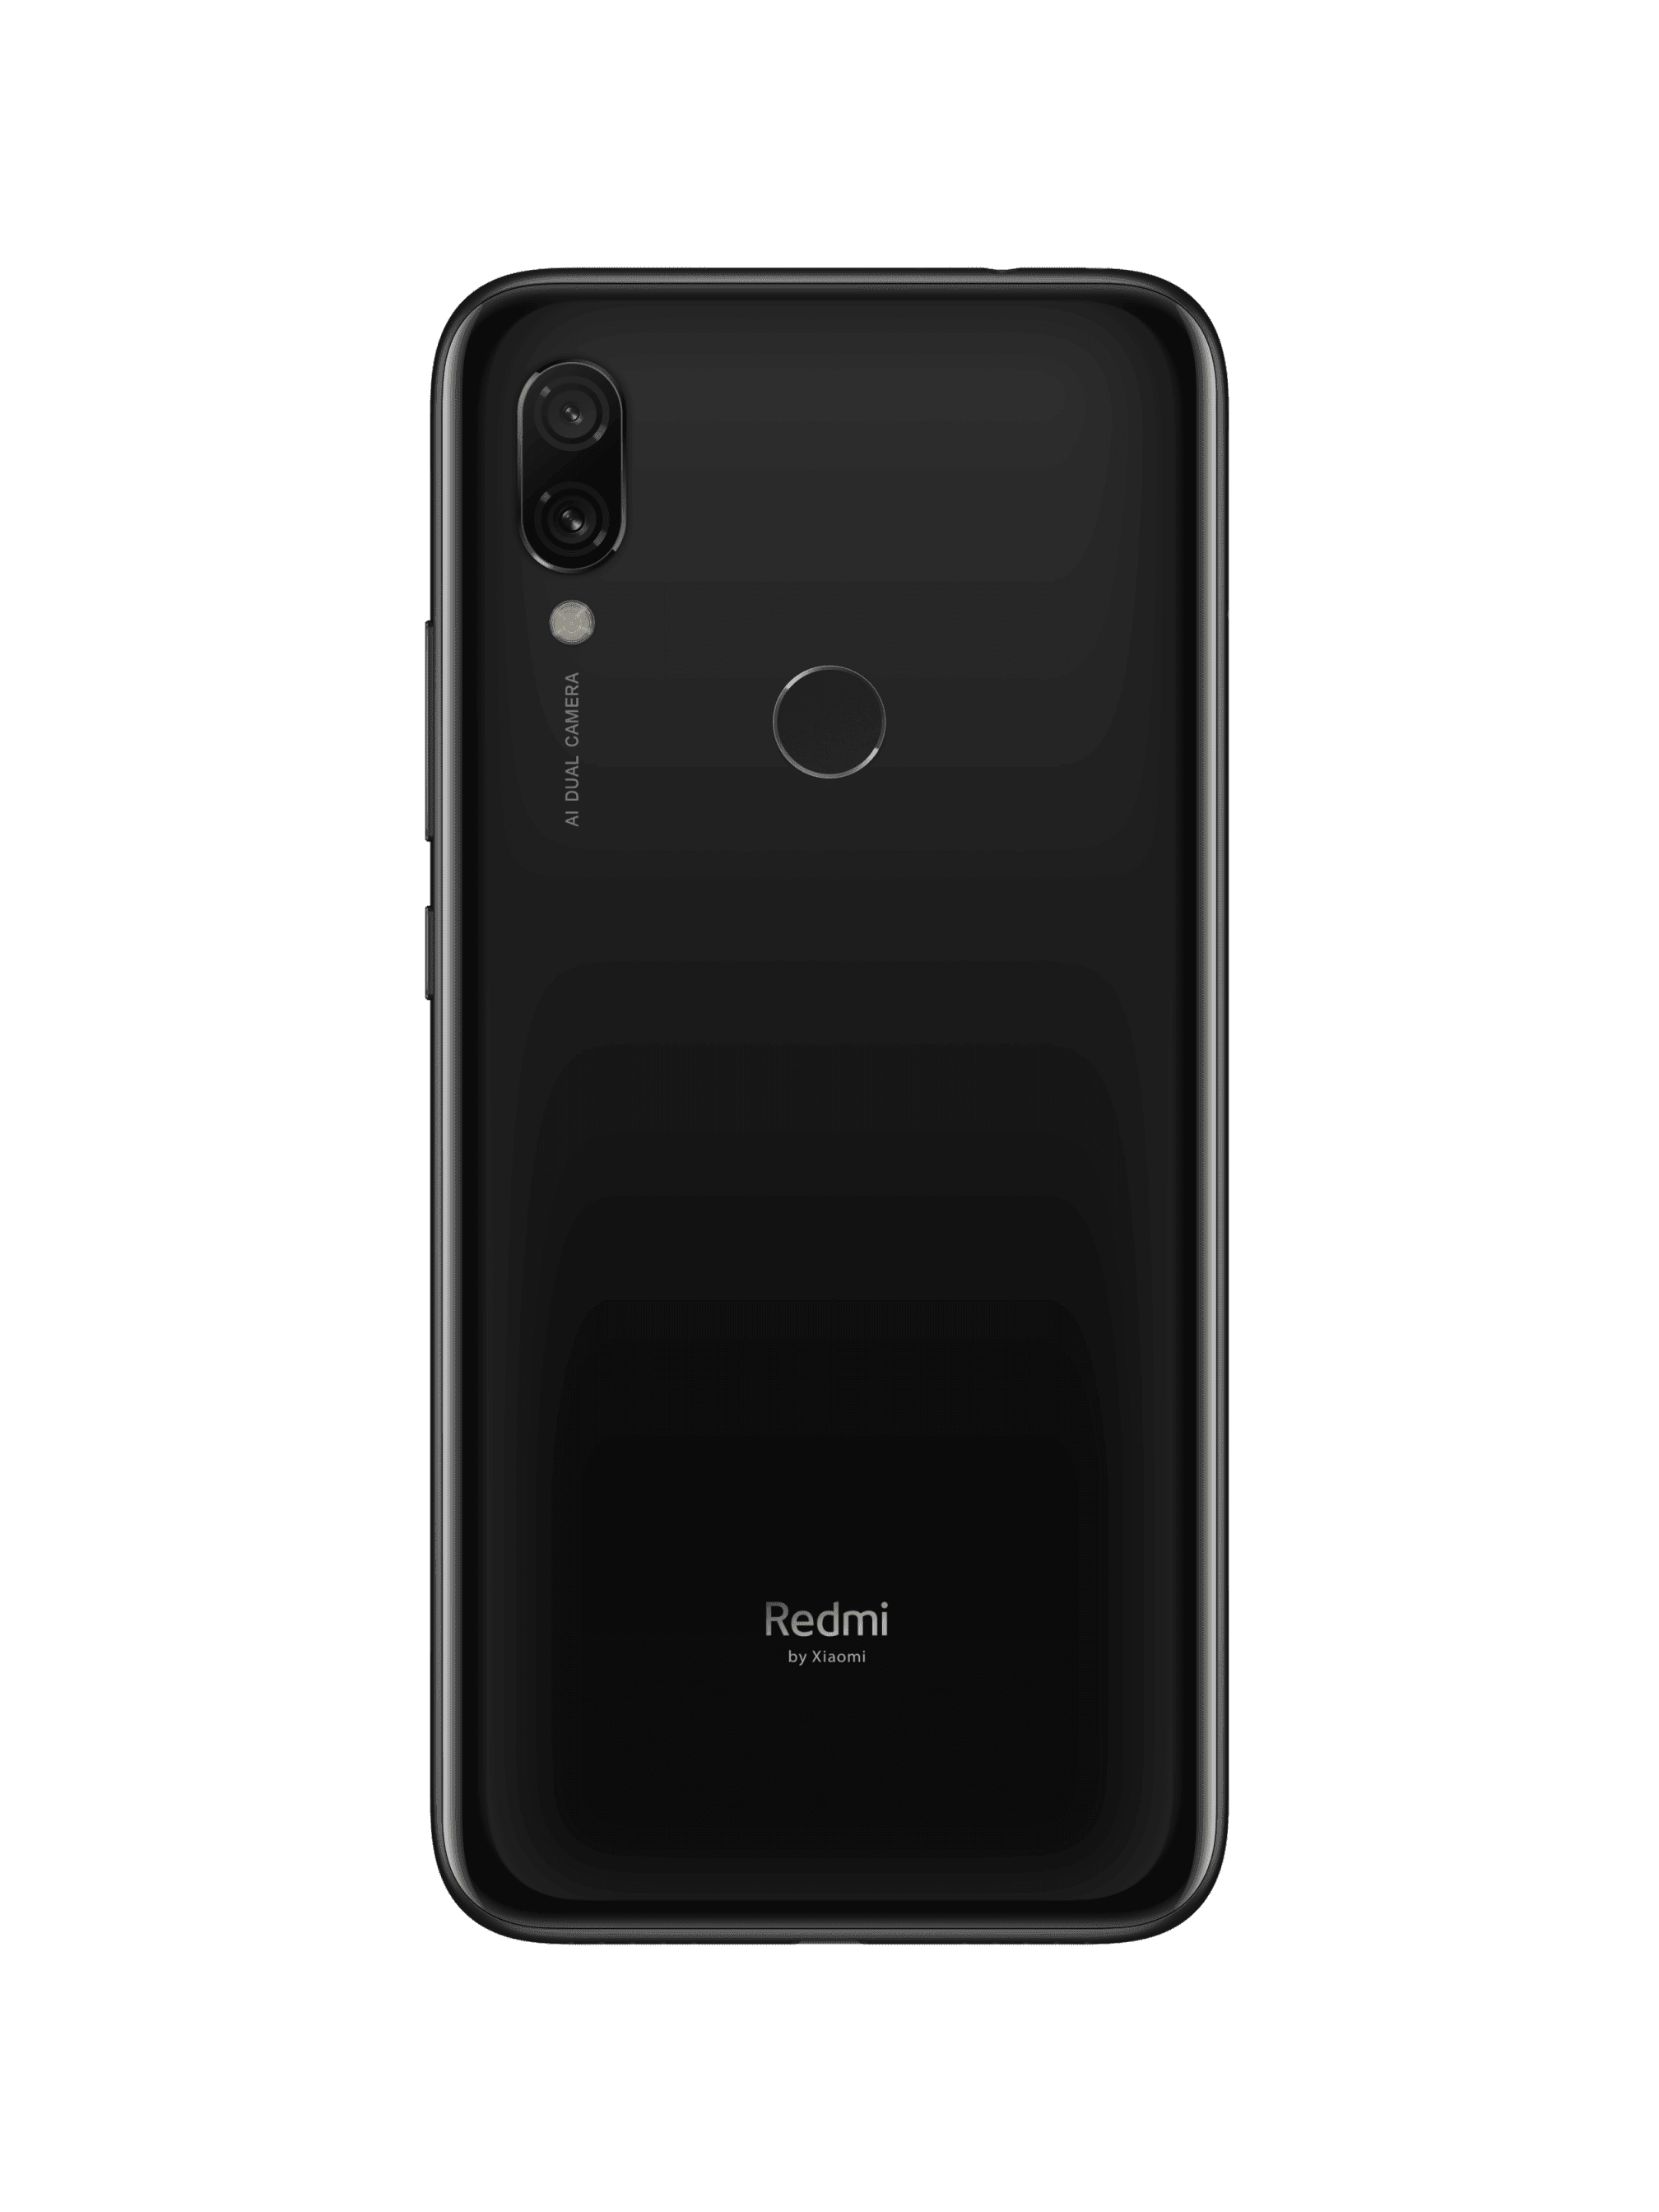 Best cheapest affordable budget phone